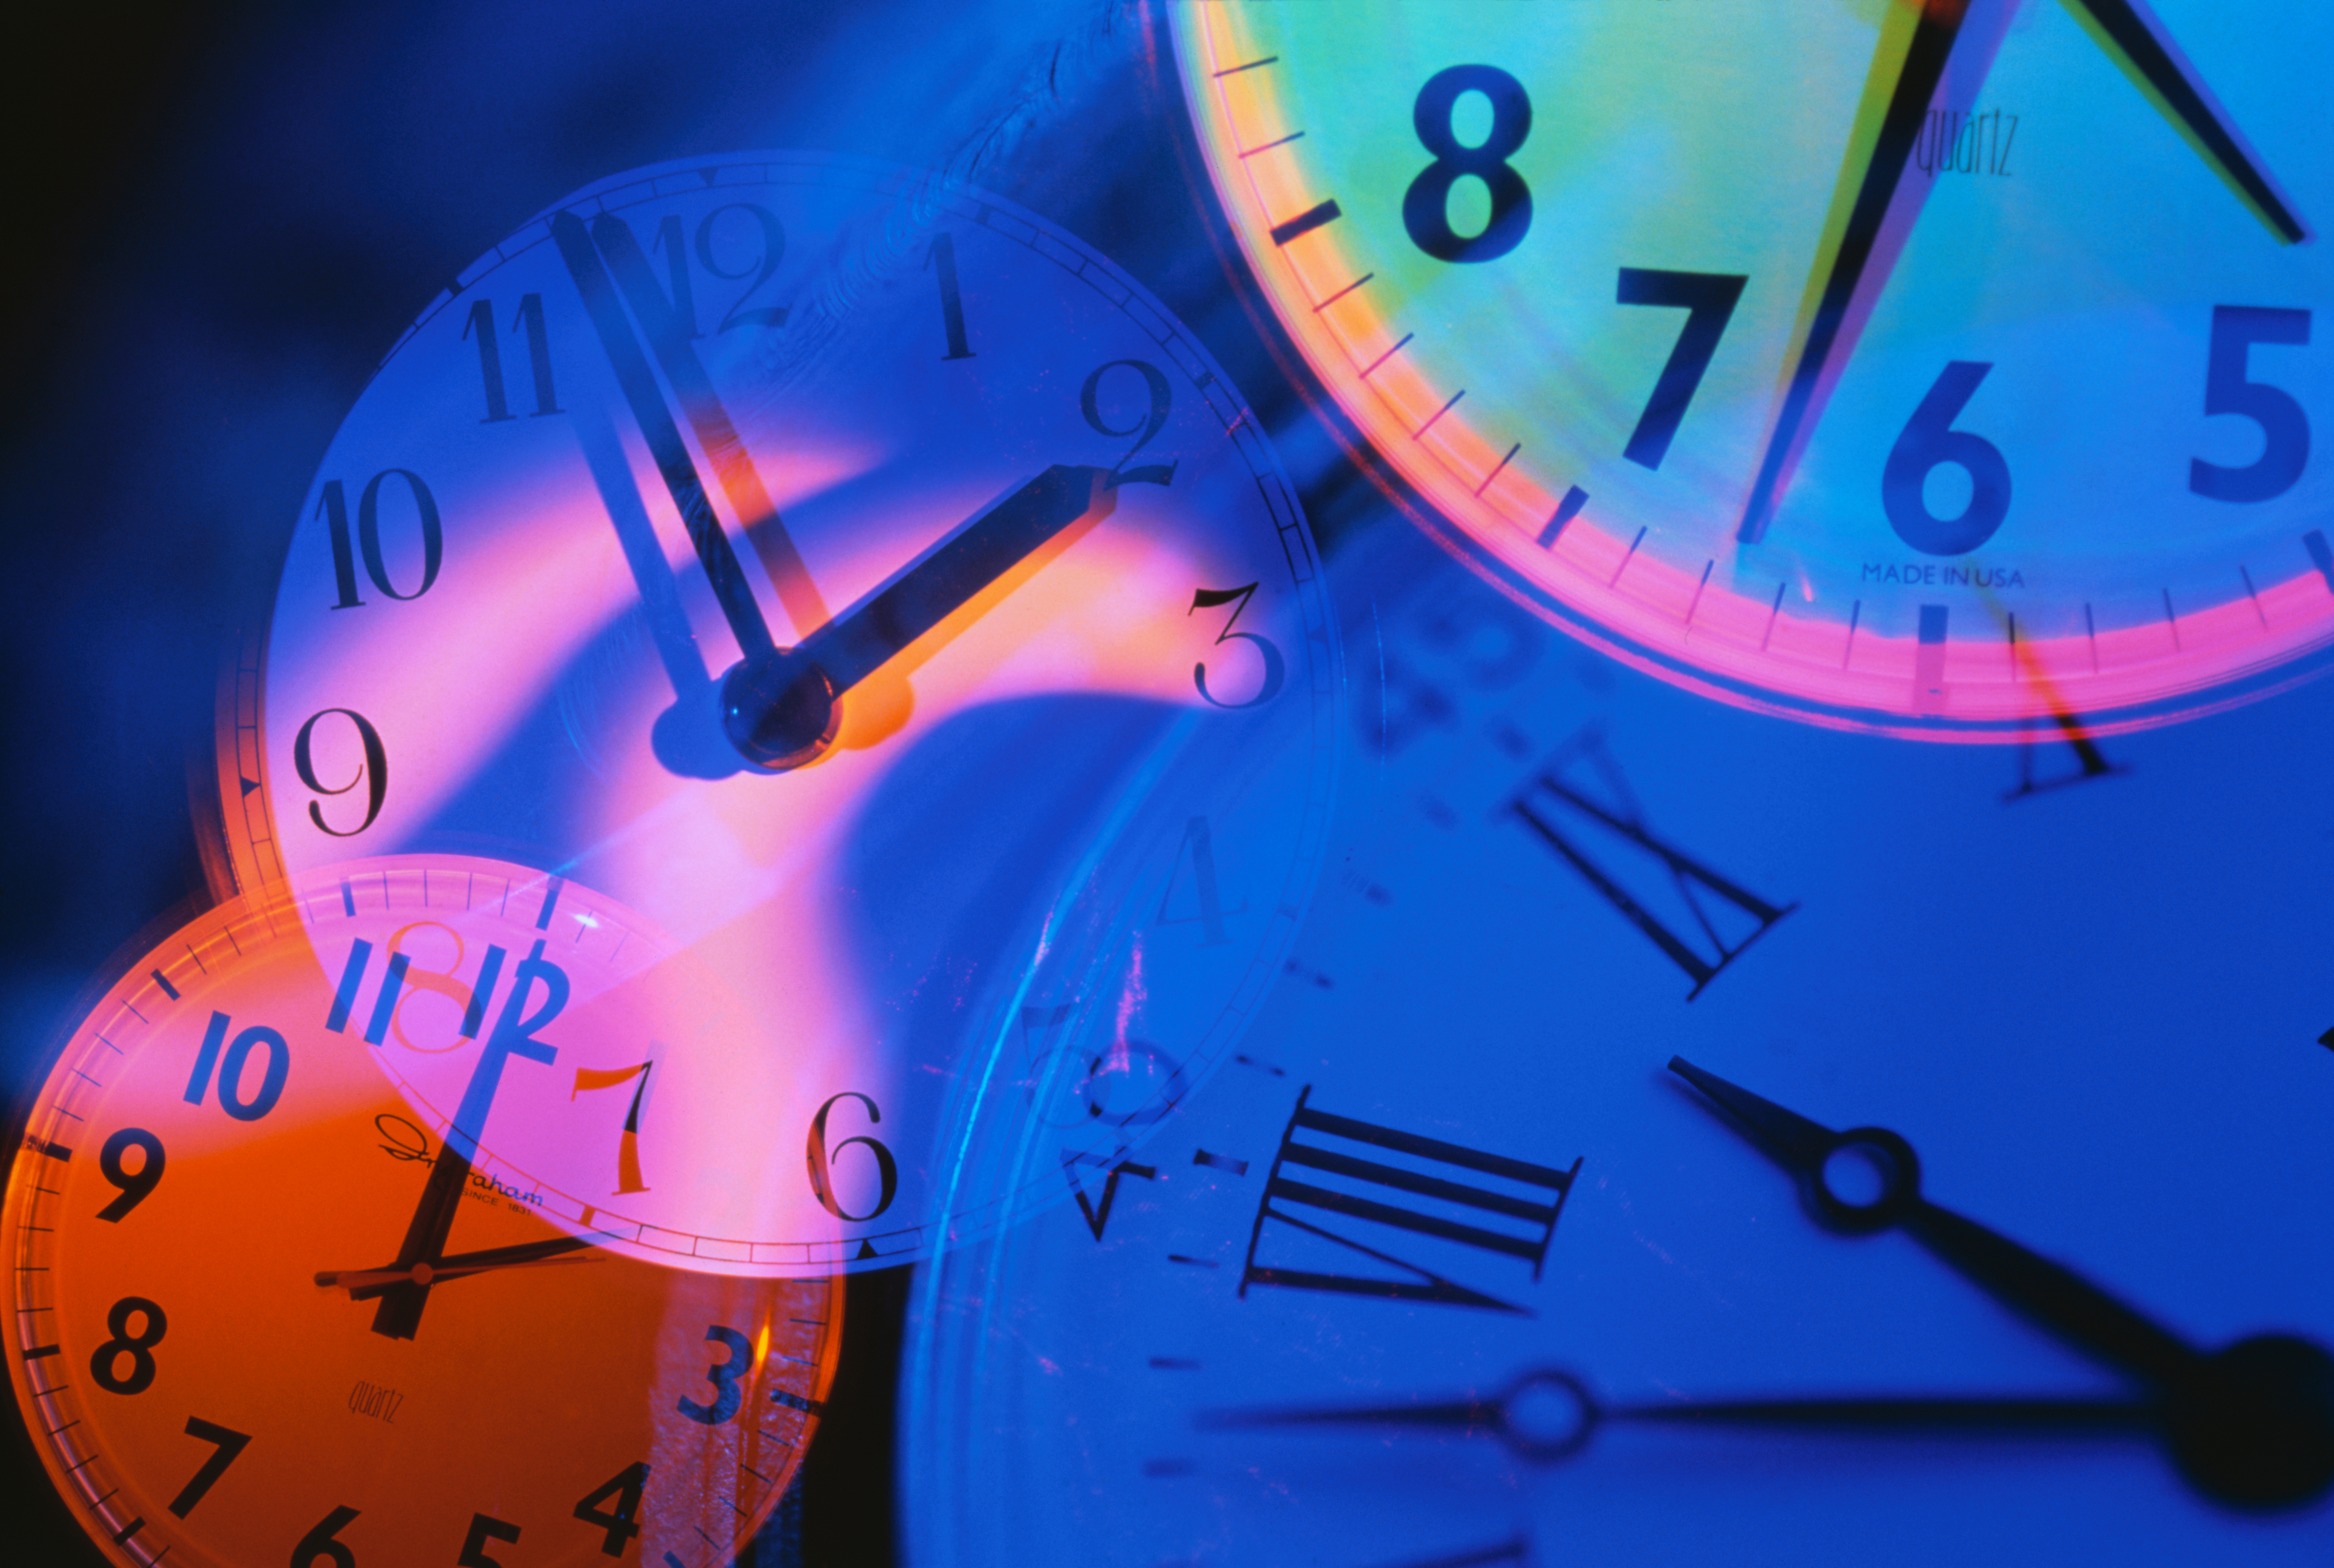 City of Dallas Office of Emergency Management on X: Don't forget to change  your clock tonight. Daylight Saving begins at 2 a.m. - SPRING FORWARD!!!  It's also a good time to check